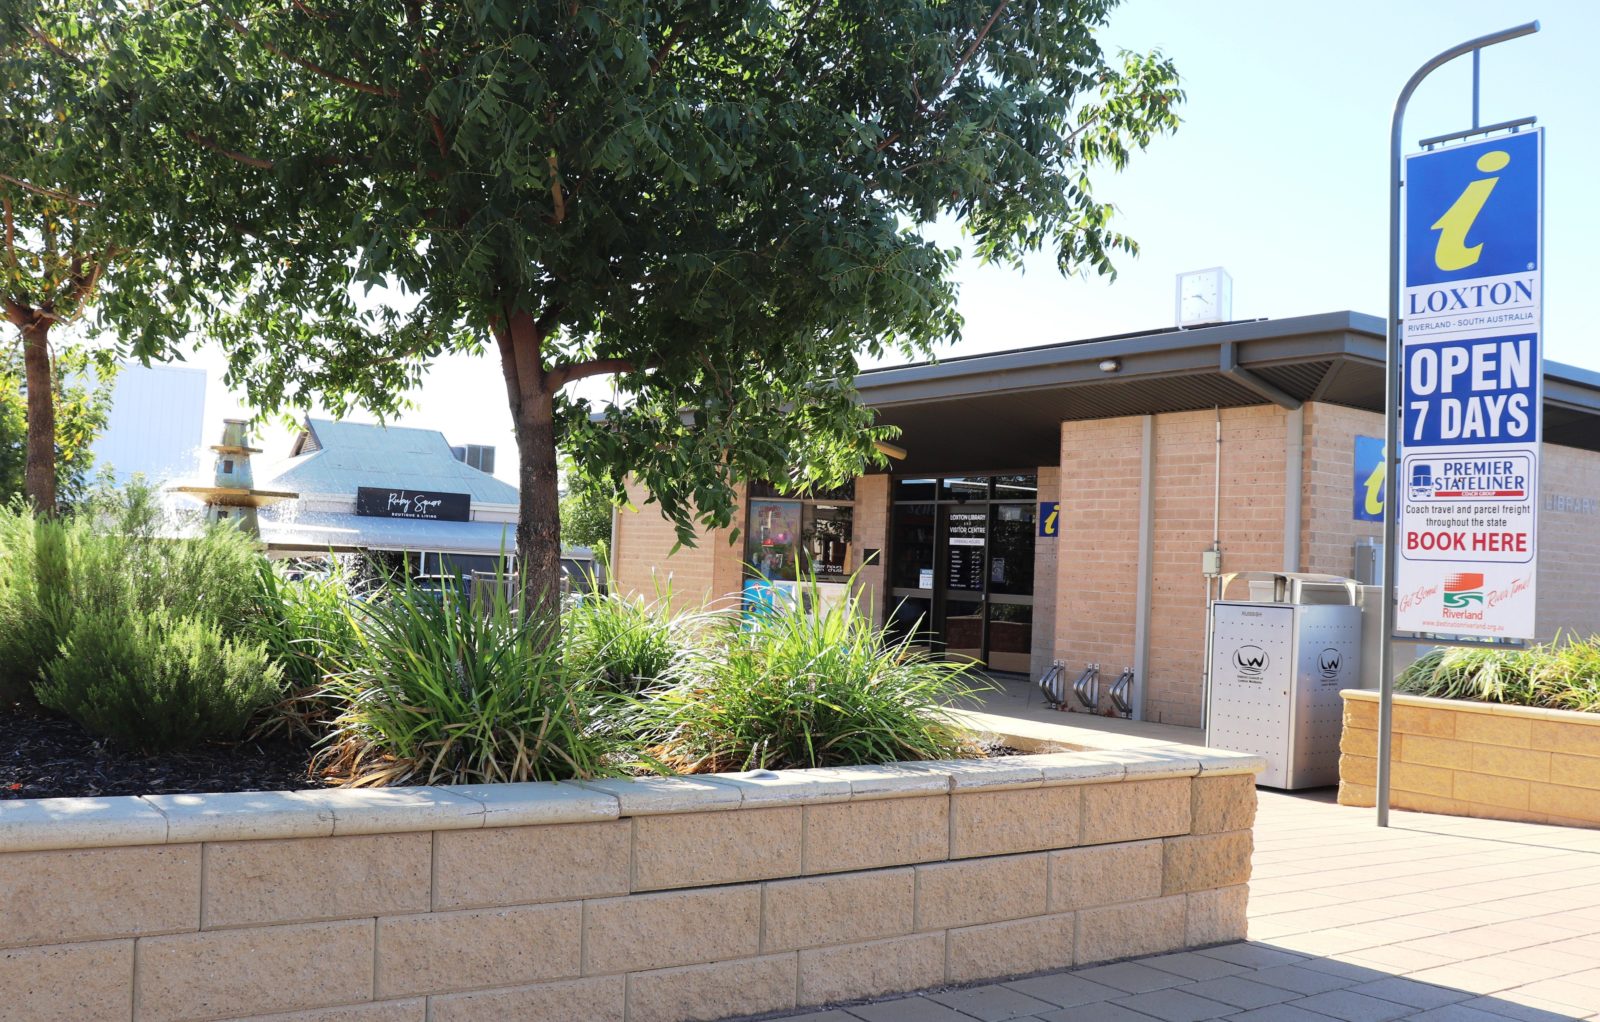 The Centre is ideally located in the heart of Loxton’s main street.